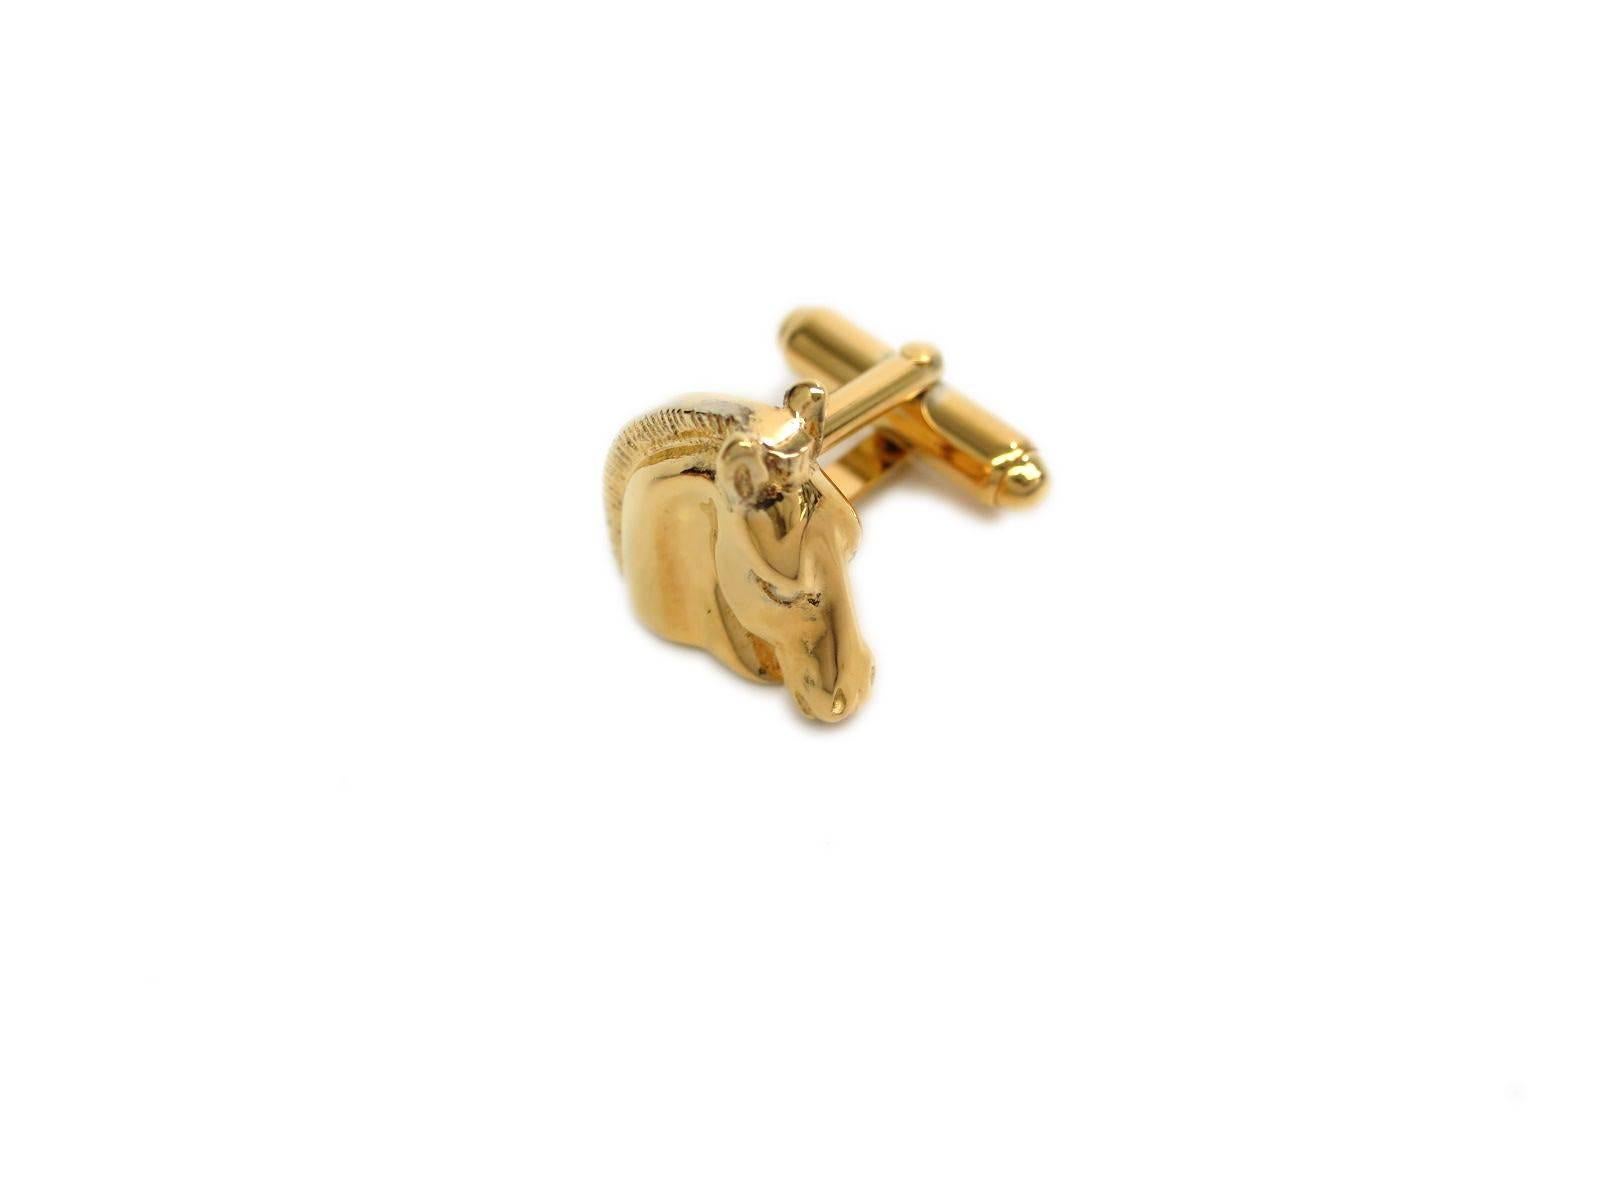 CURATOR'S NOTES

Because without them, you're not fully dressed.  Hermes gold tone Tete de Cheval horse head cufflinks.

Gold plated
Measures 0.6